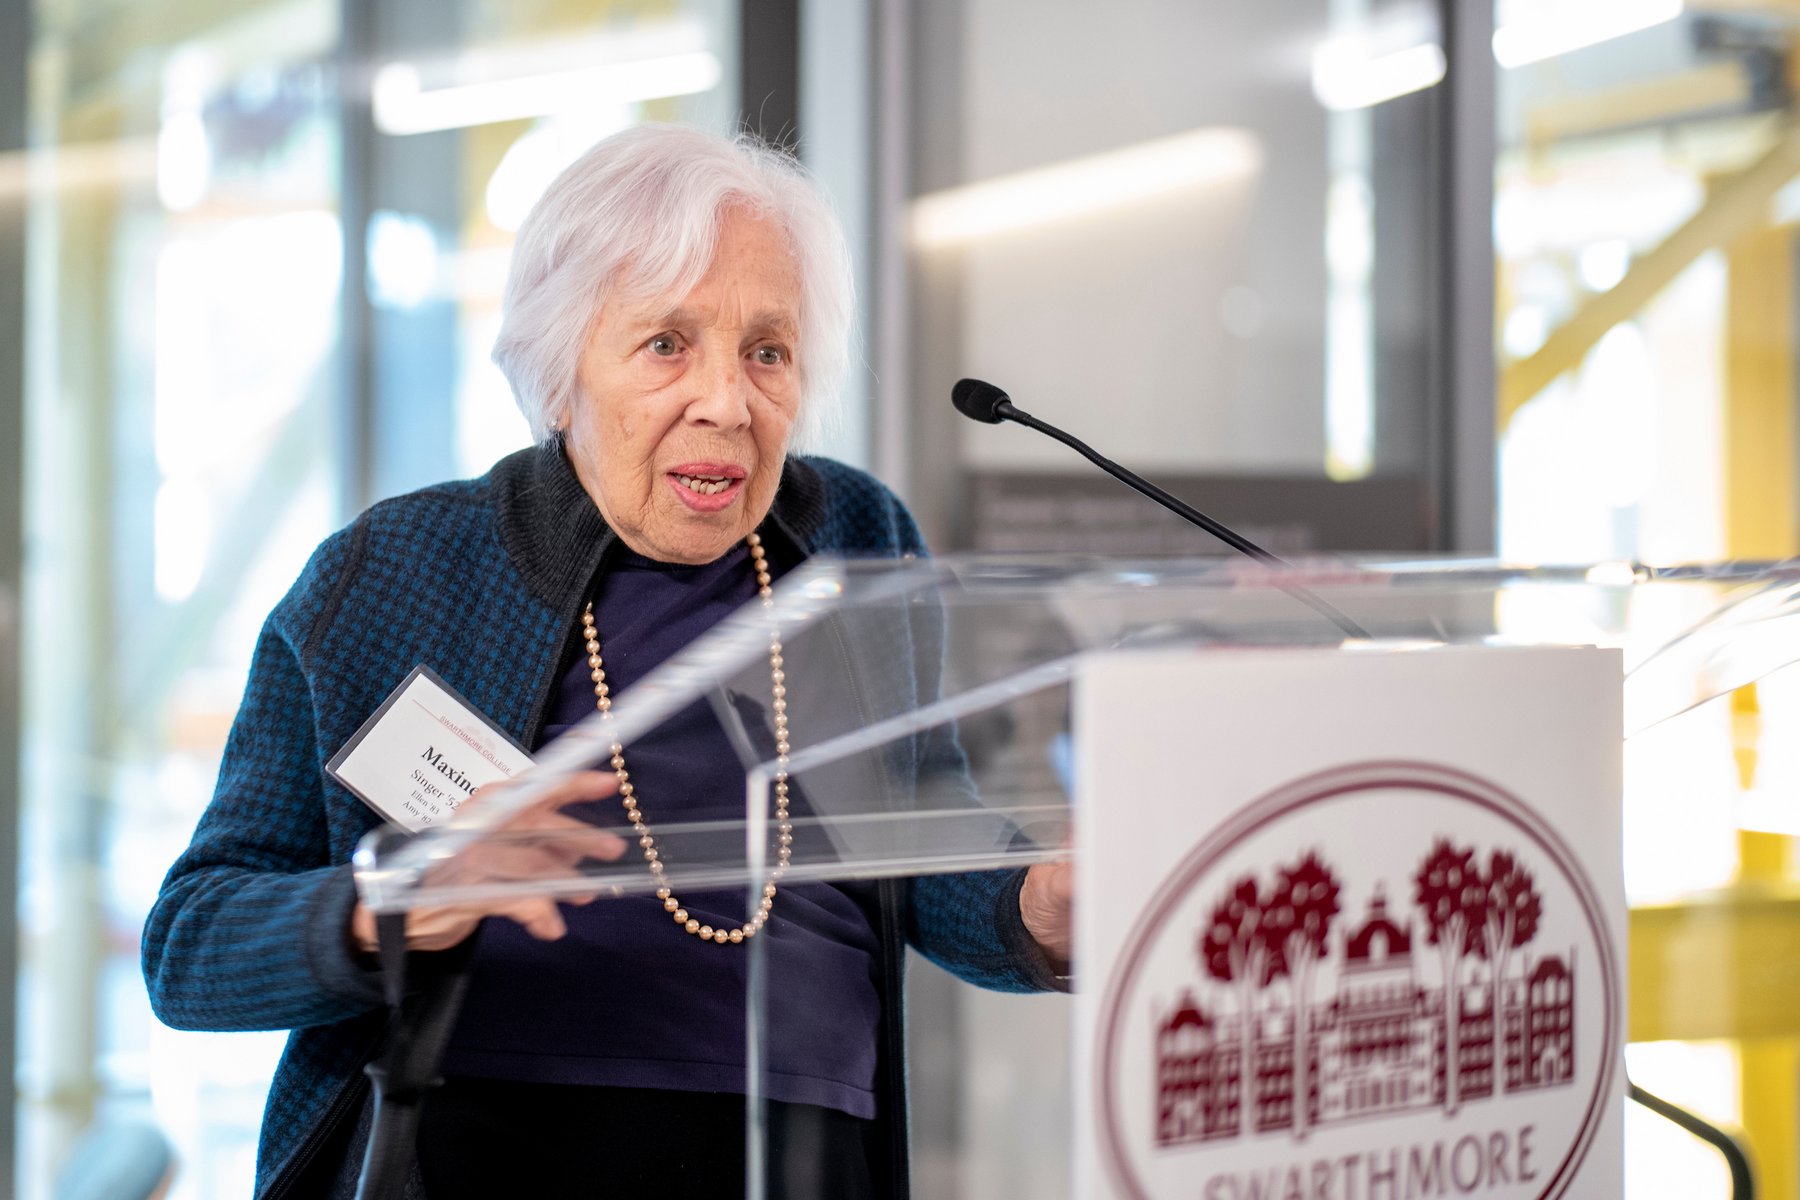 Maxine frank singer at podium during dedication of her eponymous building